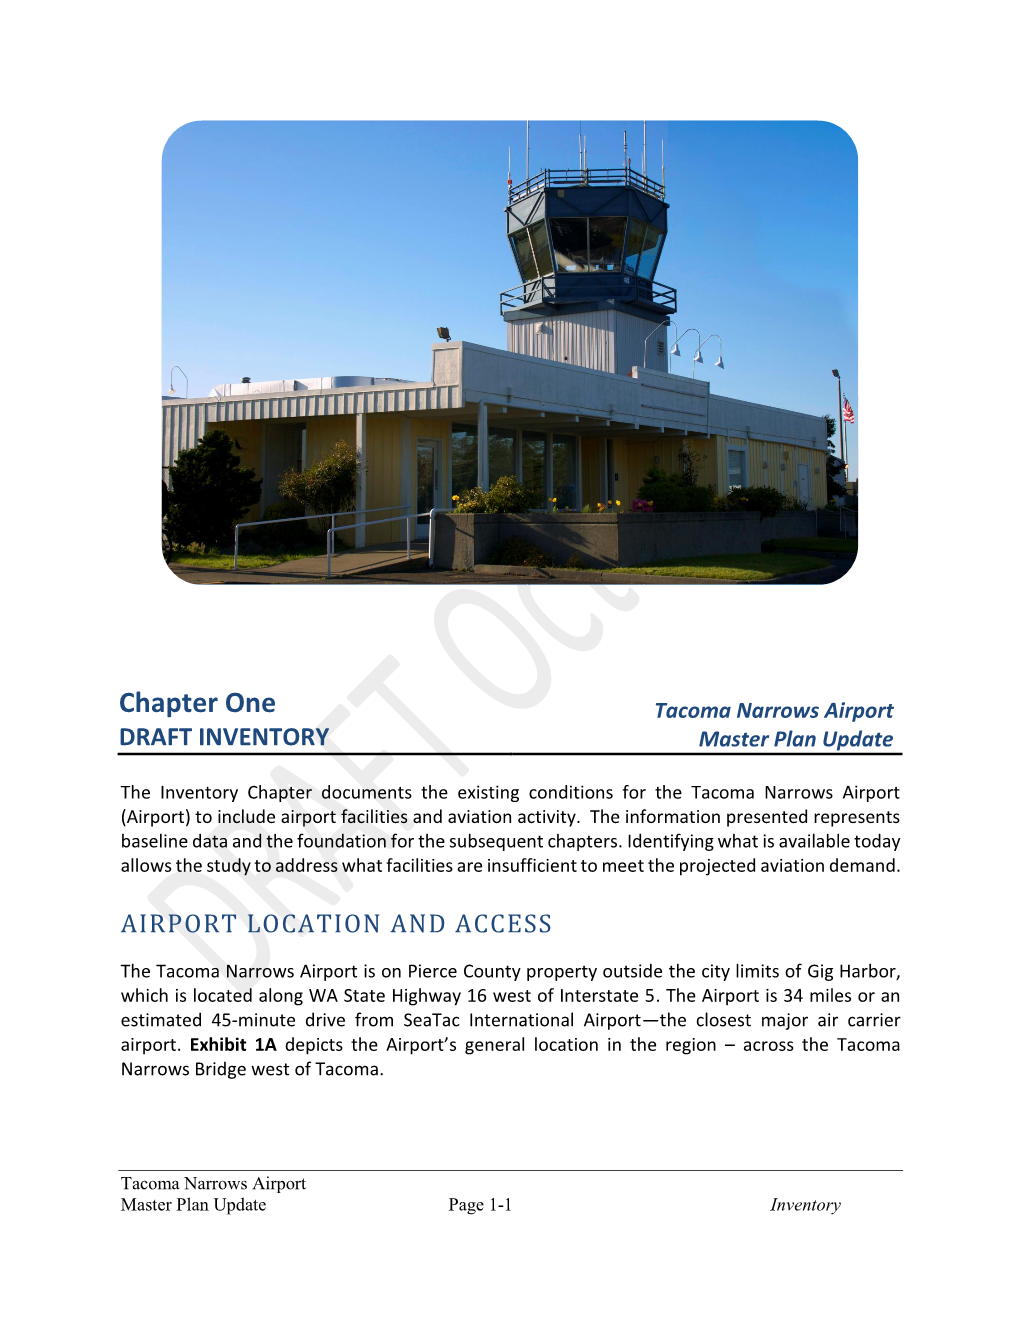 Chapter One Tacoma Narrows Airport DRAFT INVENTORY Master Plan Update